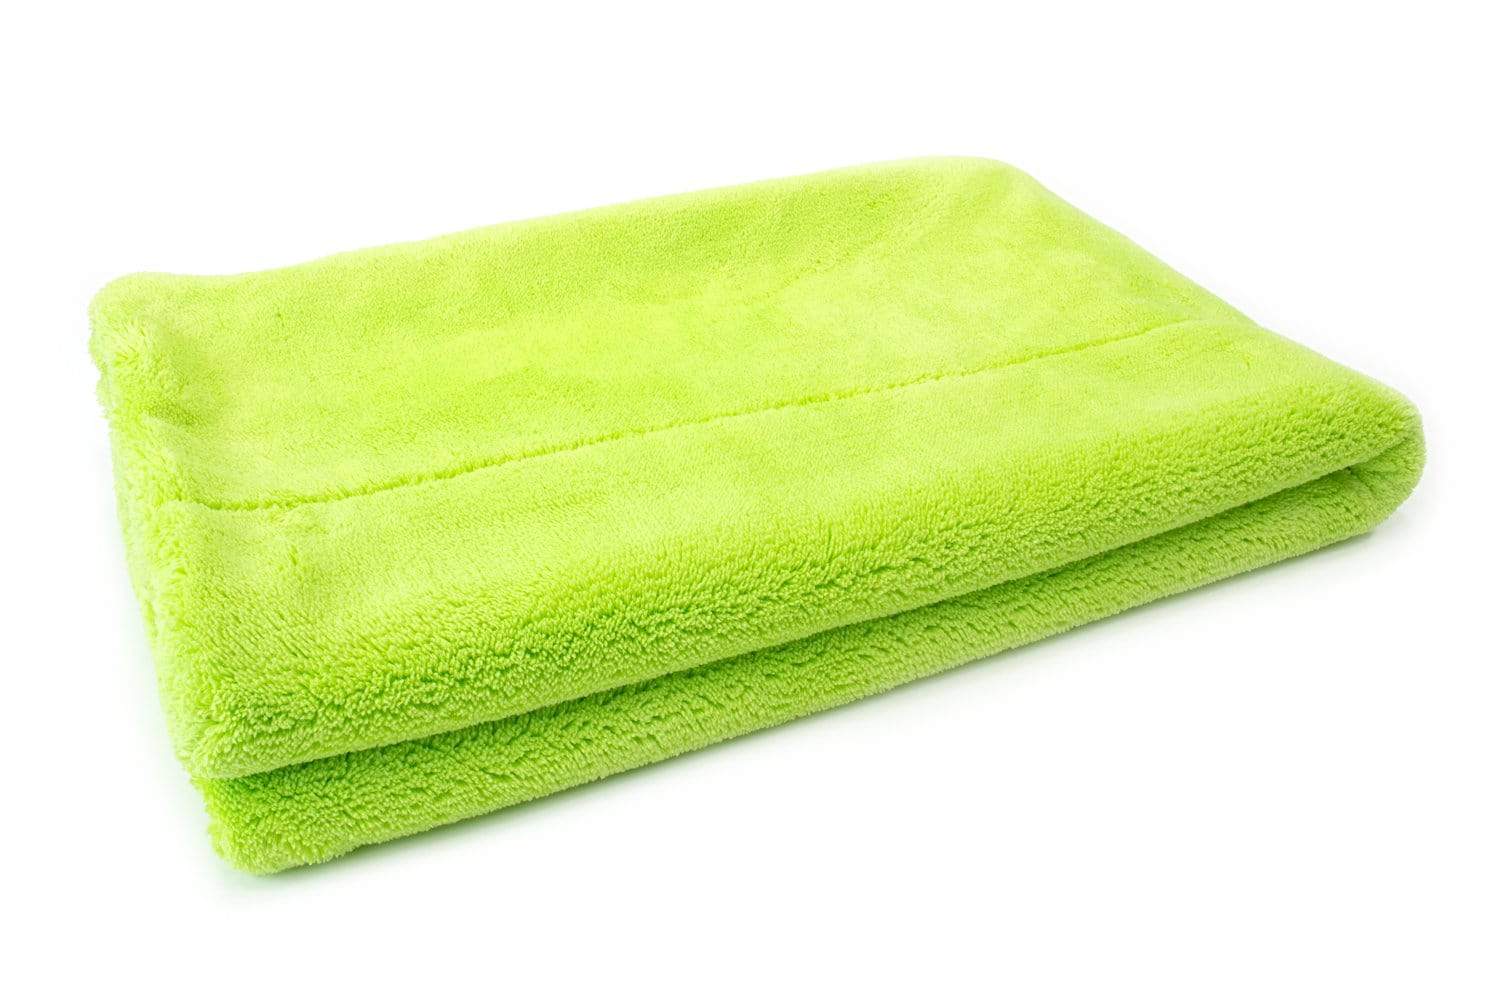 Autofiber Towel Green [Motherfluffer XL+] Xtra-Large Plush Microfiber Drying Towel (20 in. x 40 in., 1100 gsm) 1 pack